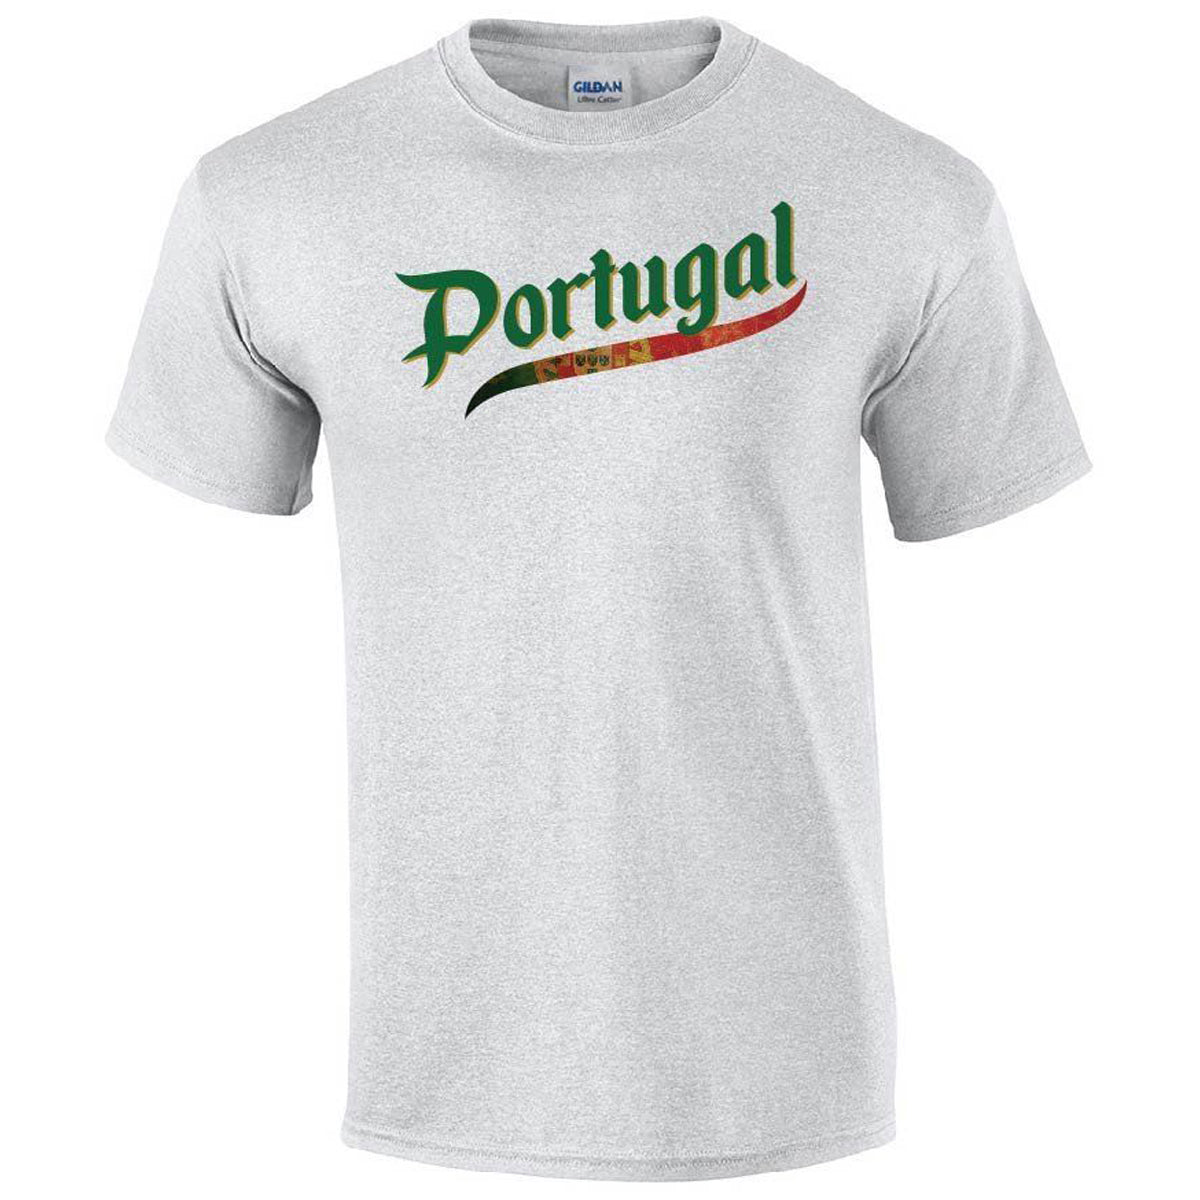 Portugal Script World Cup 2022 Printed Tee T-shirts 411 Youth Medium Ash Youth